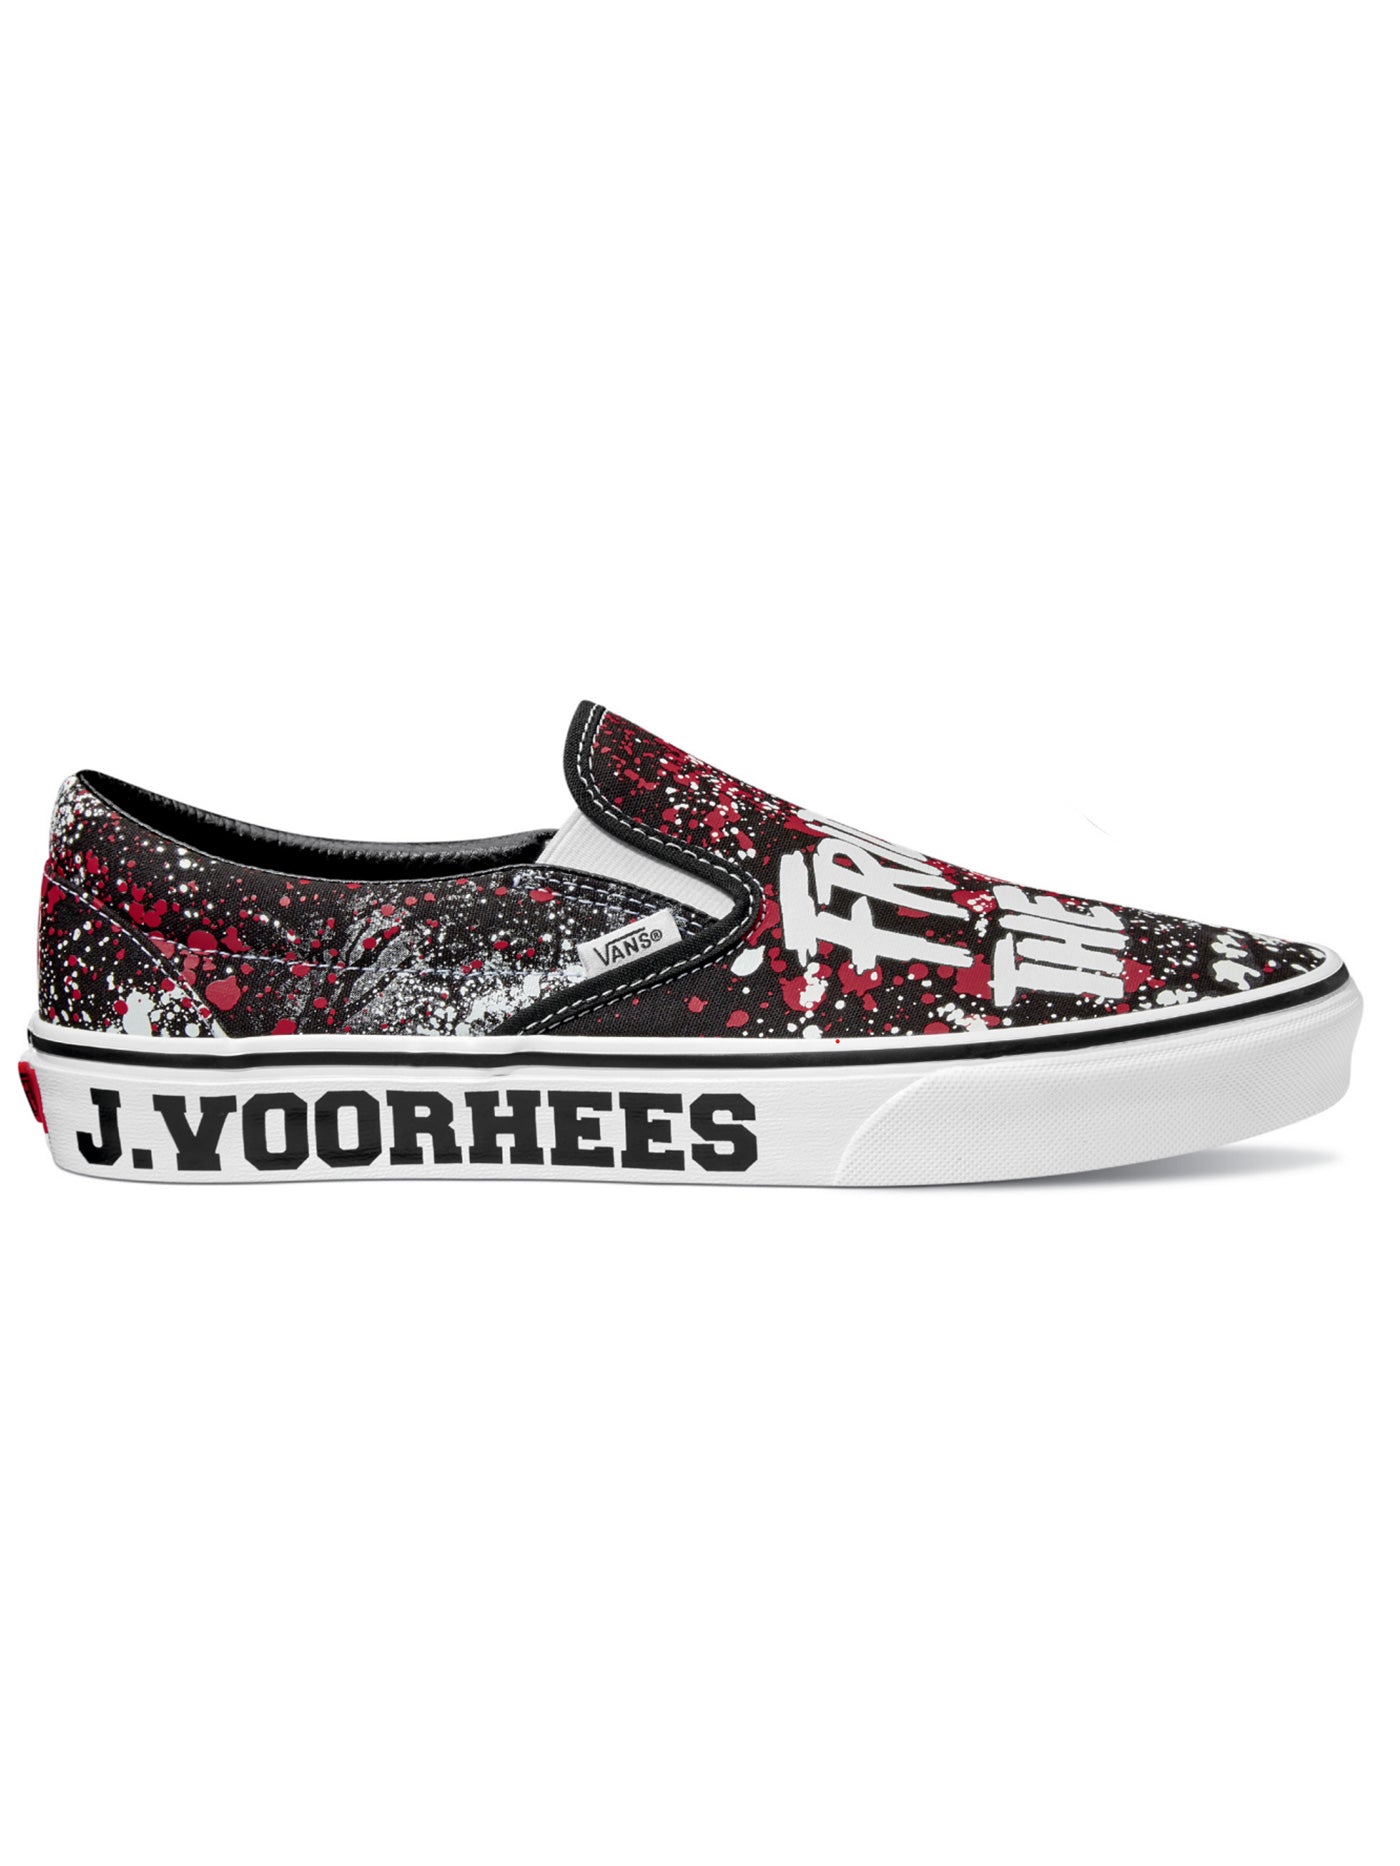 Vans x House of Horror Fall 2021 Friday 13th Slip-On Shoes